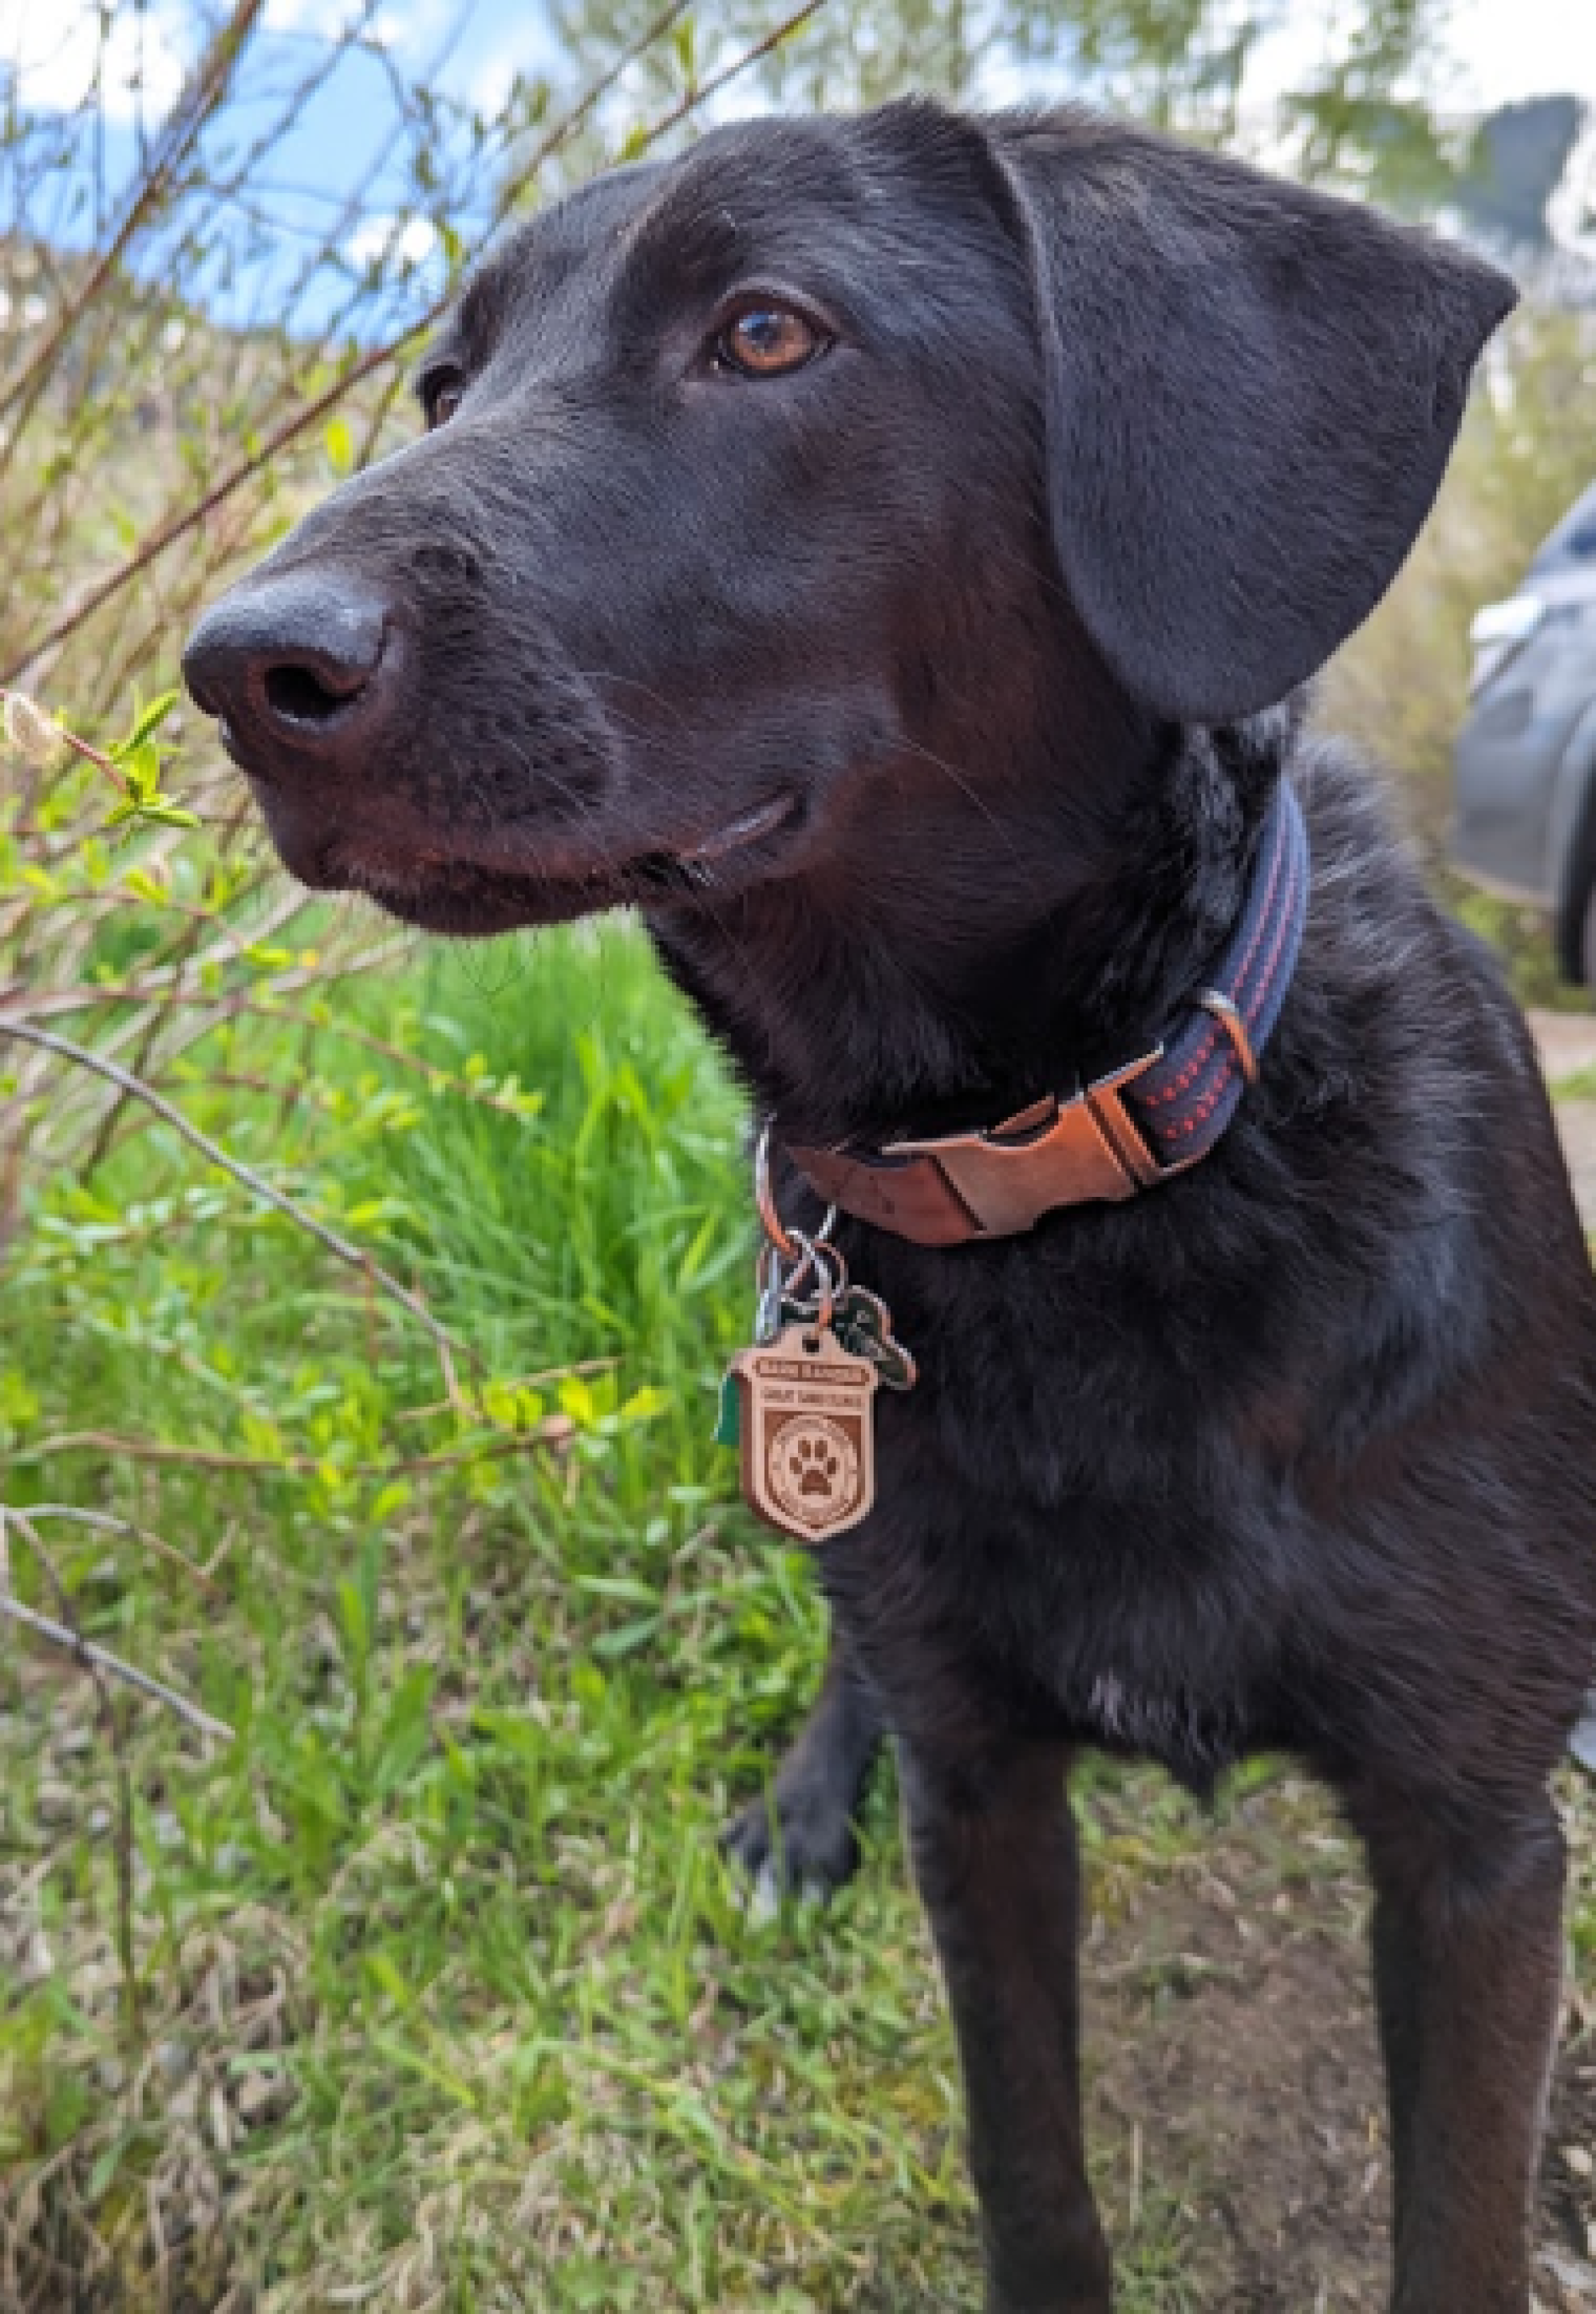 A close-up picture of a black dog in the grass looking outward